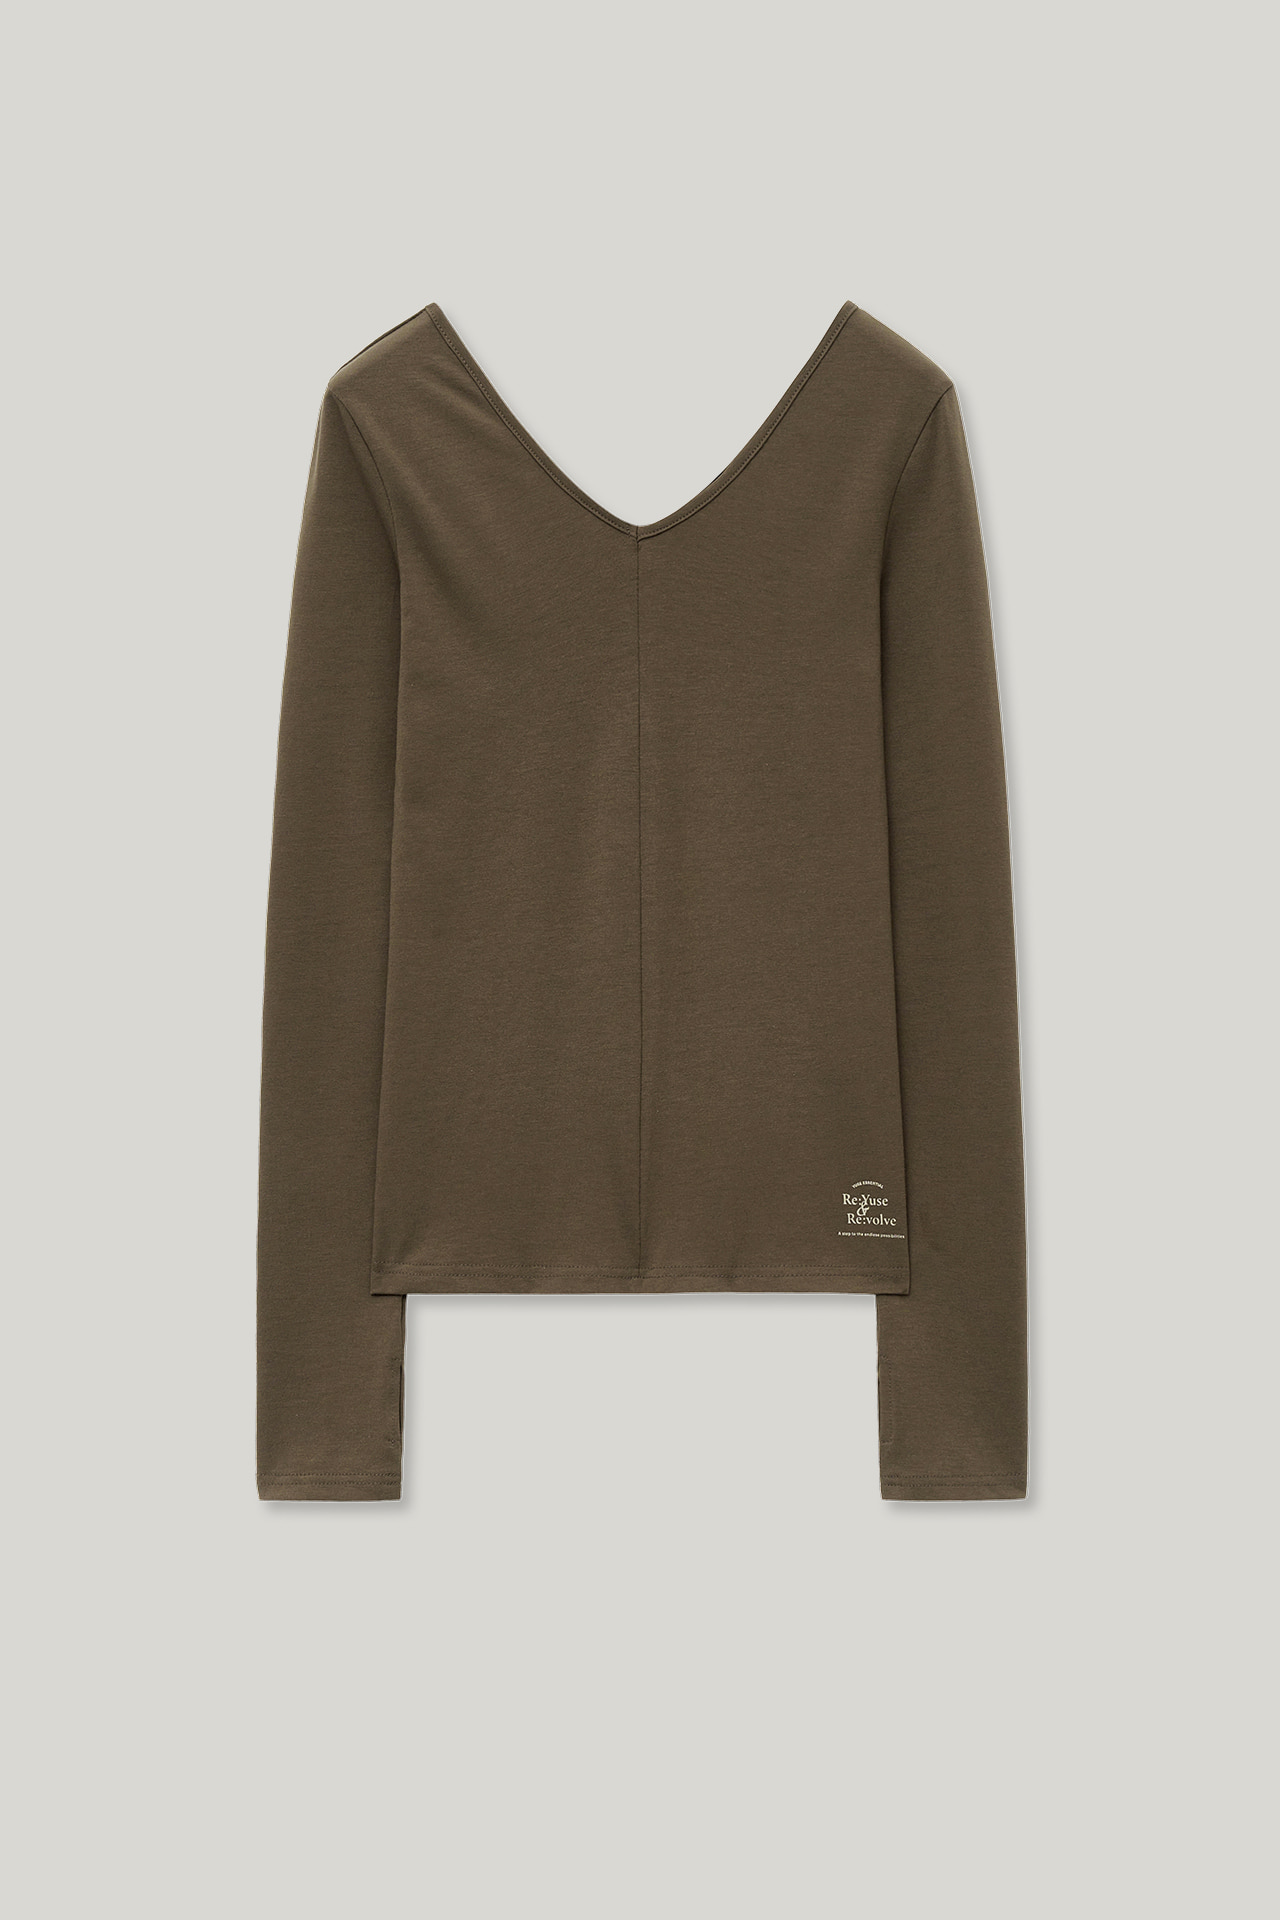 [RE:YUSE] BASIC RECYCLE V-NECK TOP - BROWN